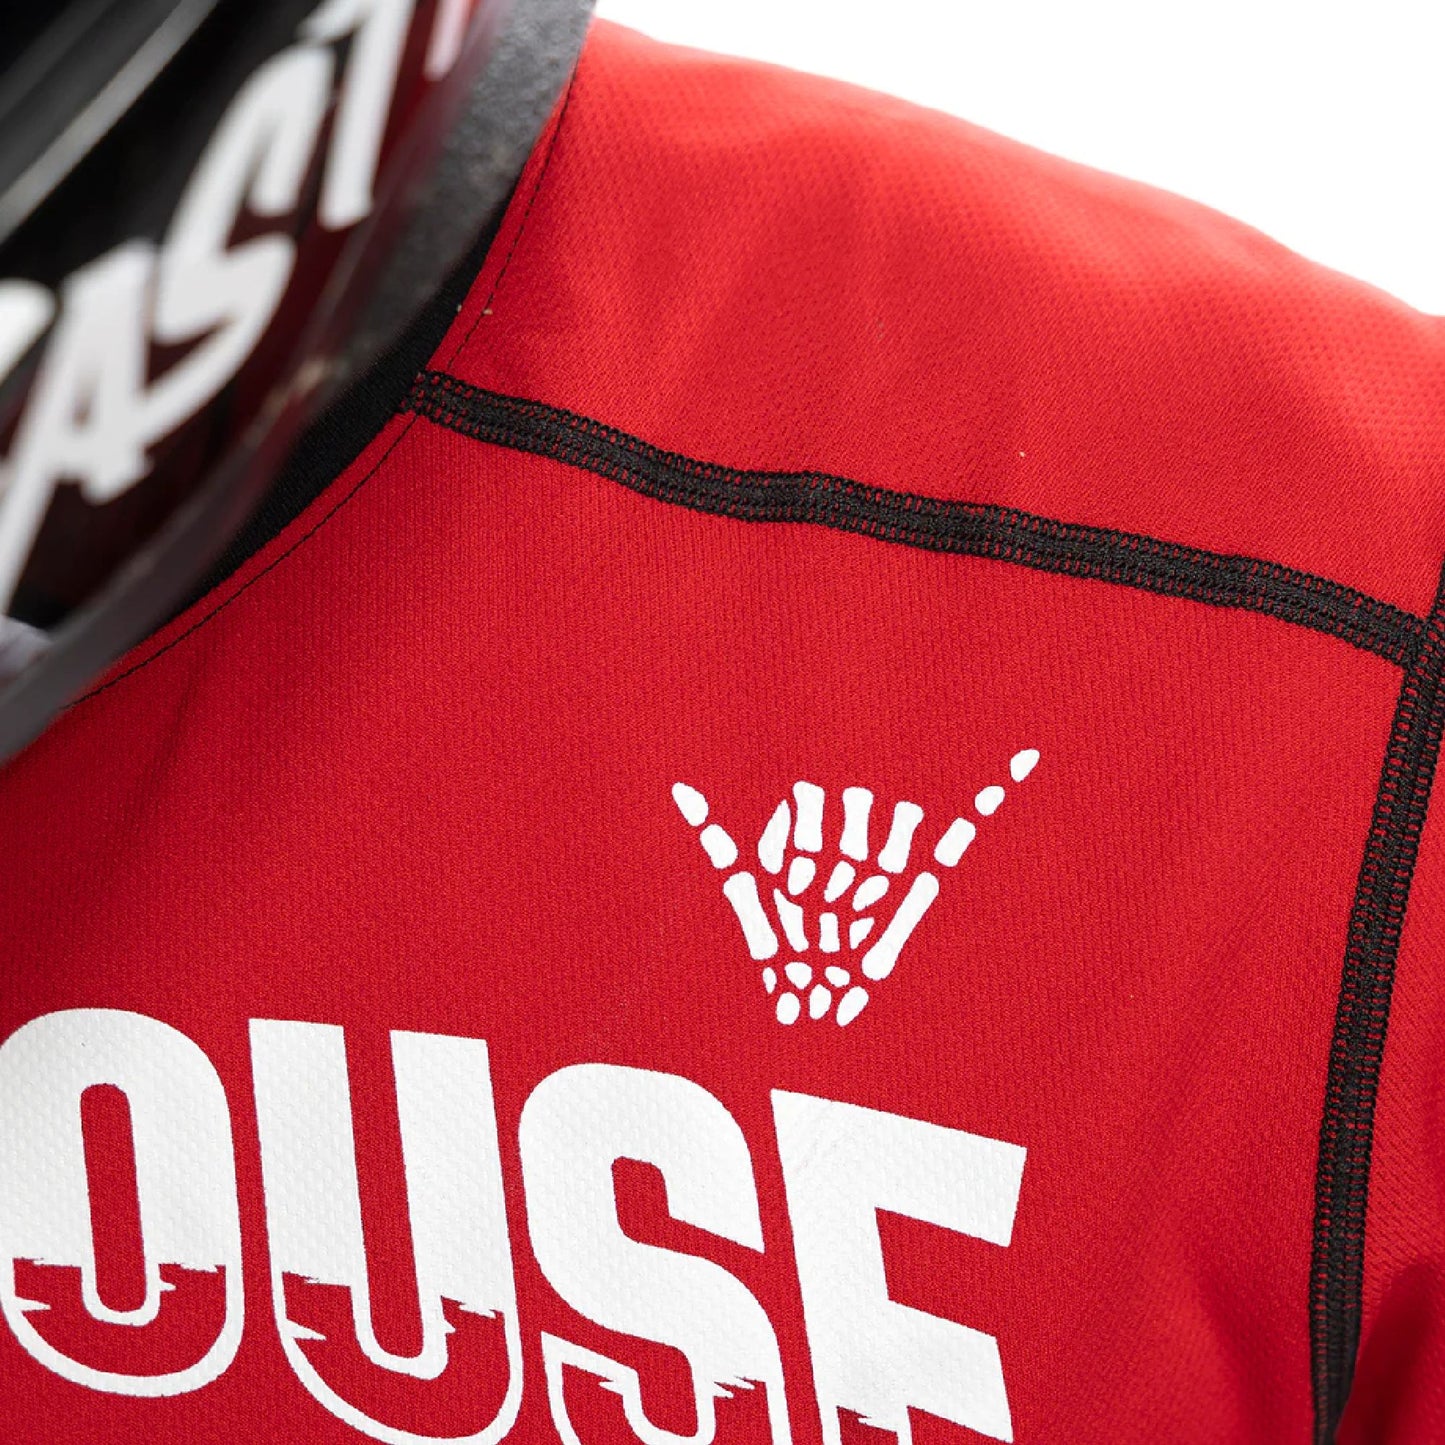 Fasthouse USA Grindhouse Subside Jersey Red Bike Jerseys